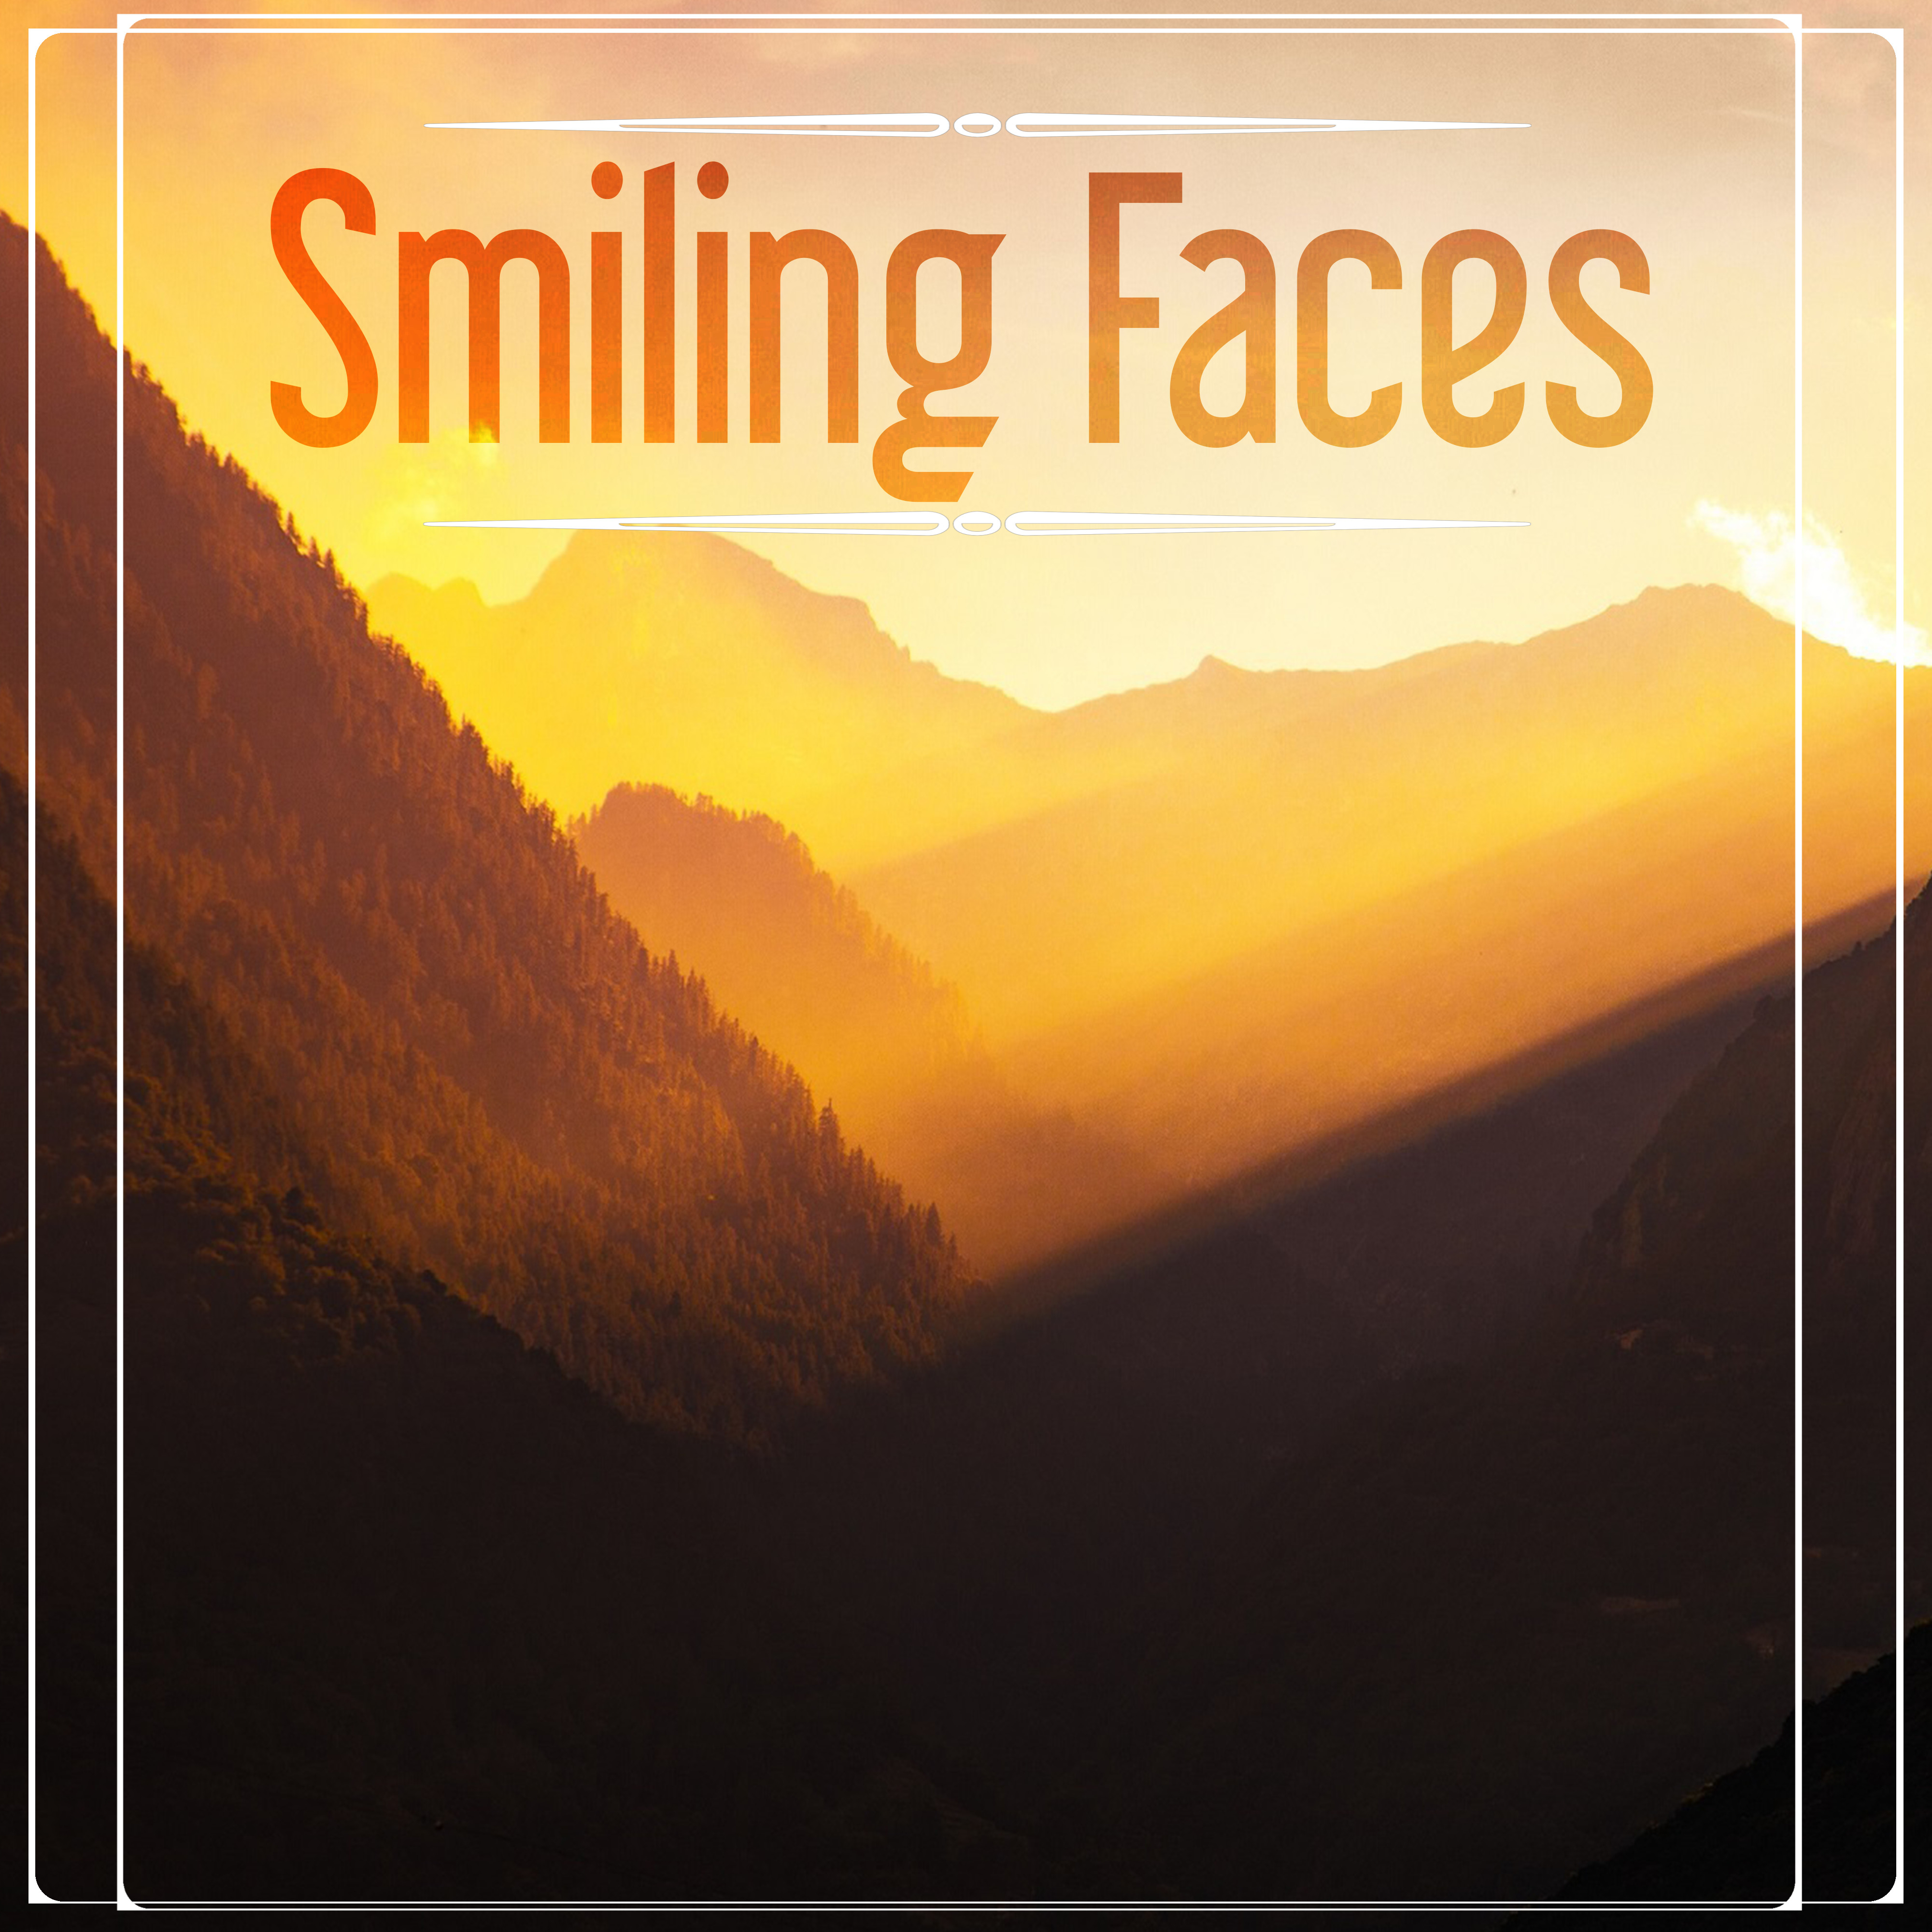 Smiling Faces - Cafè Soft Songs, Relaxing Jazz Music Bar and Mood Music, Jazz Guitar